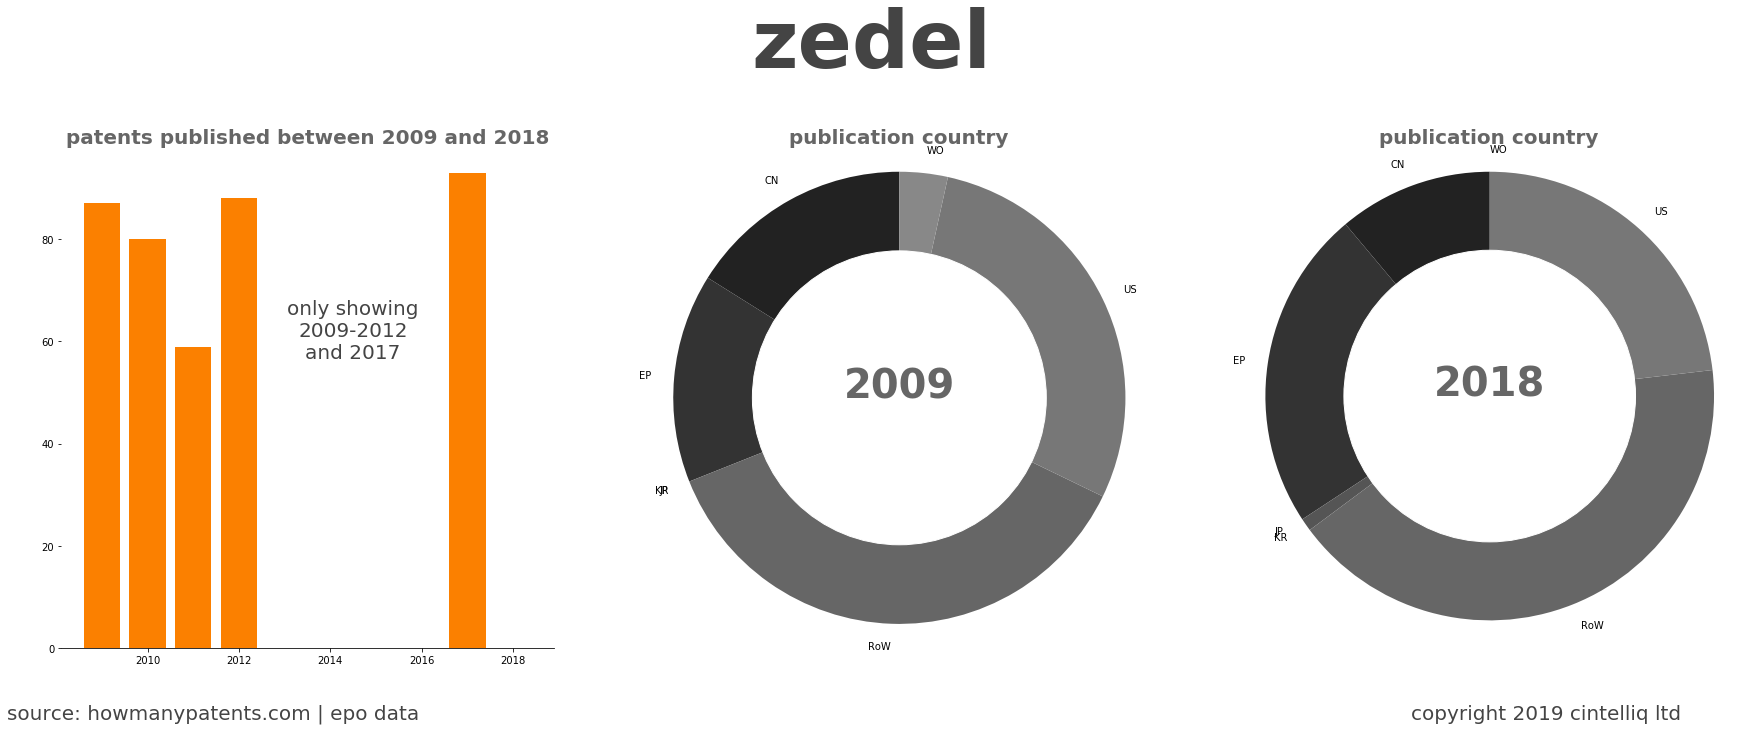 summary of patents for Zedel